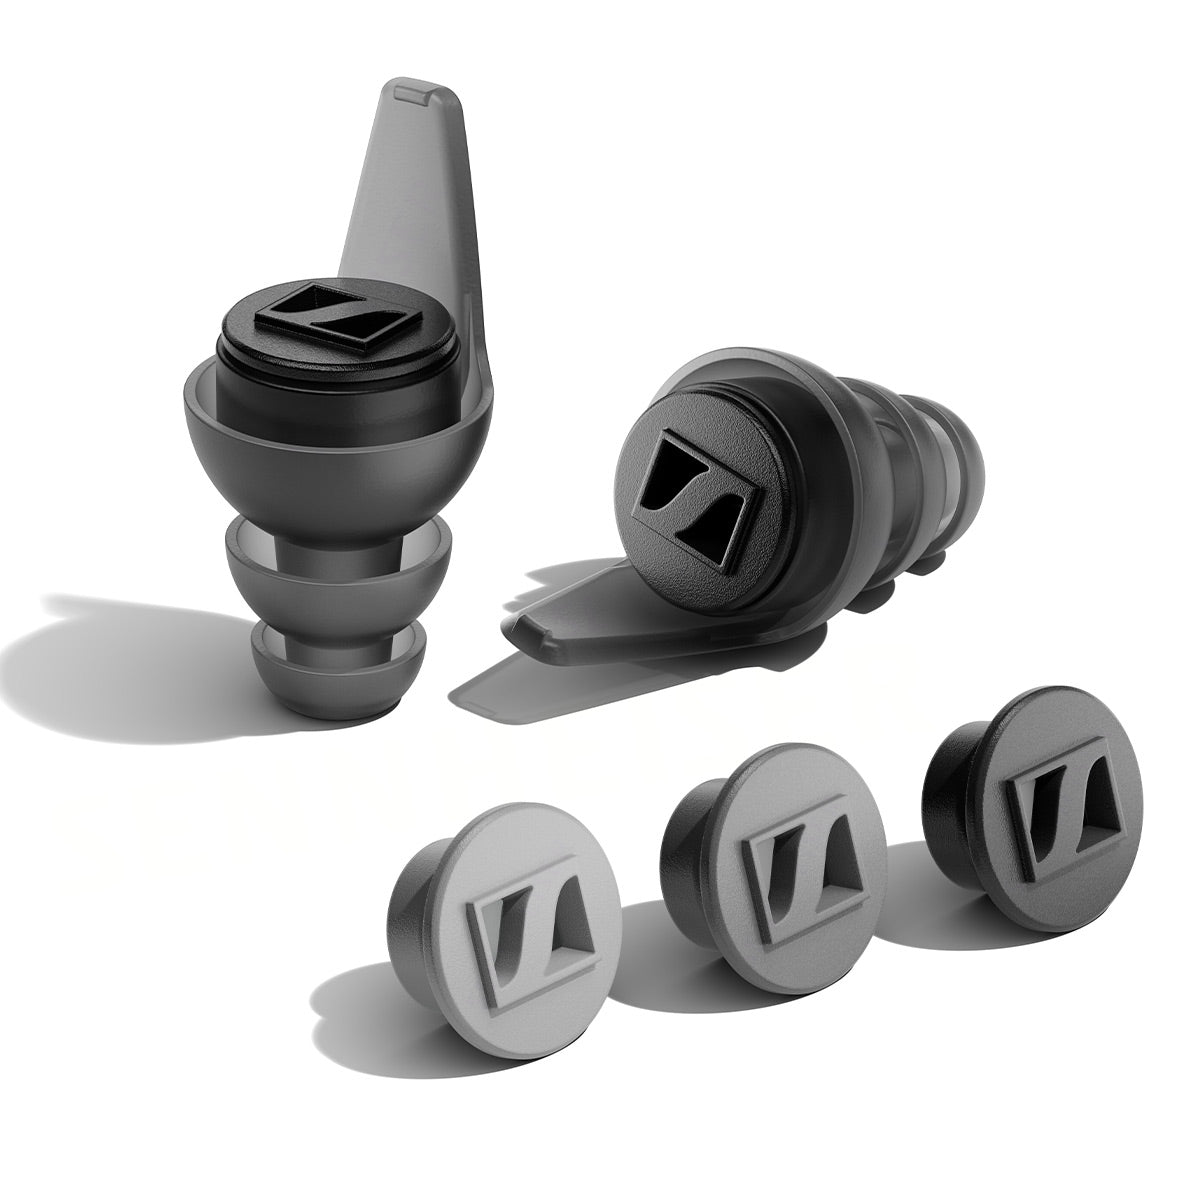 Sennheiser SoundProtex Plus Hearing Protection Earplugs with 3 Acoustic Filters